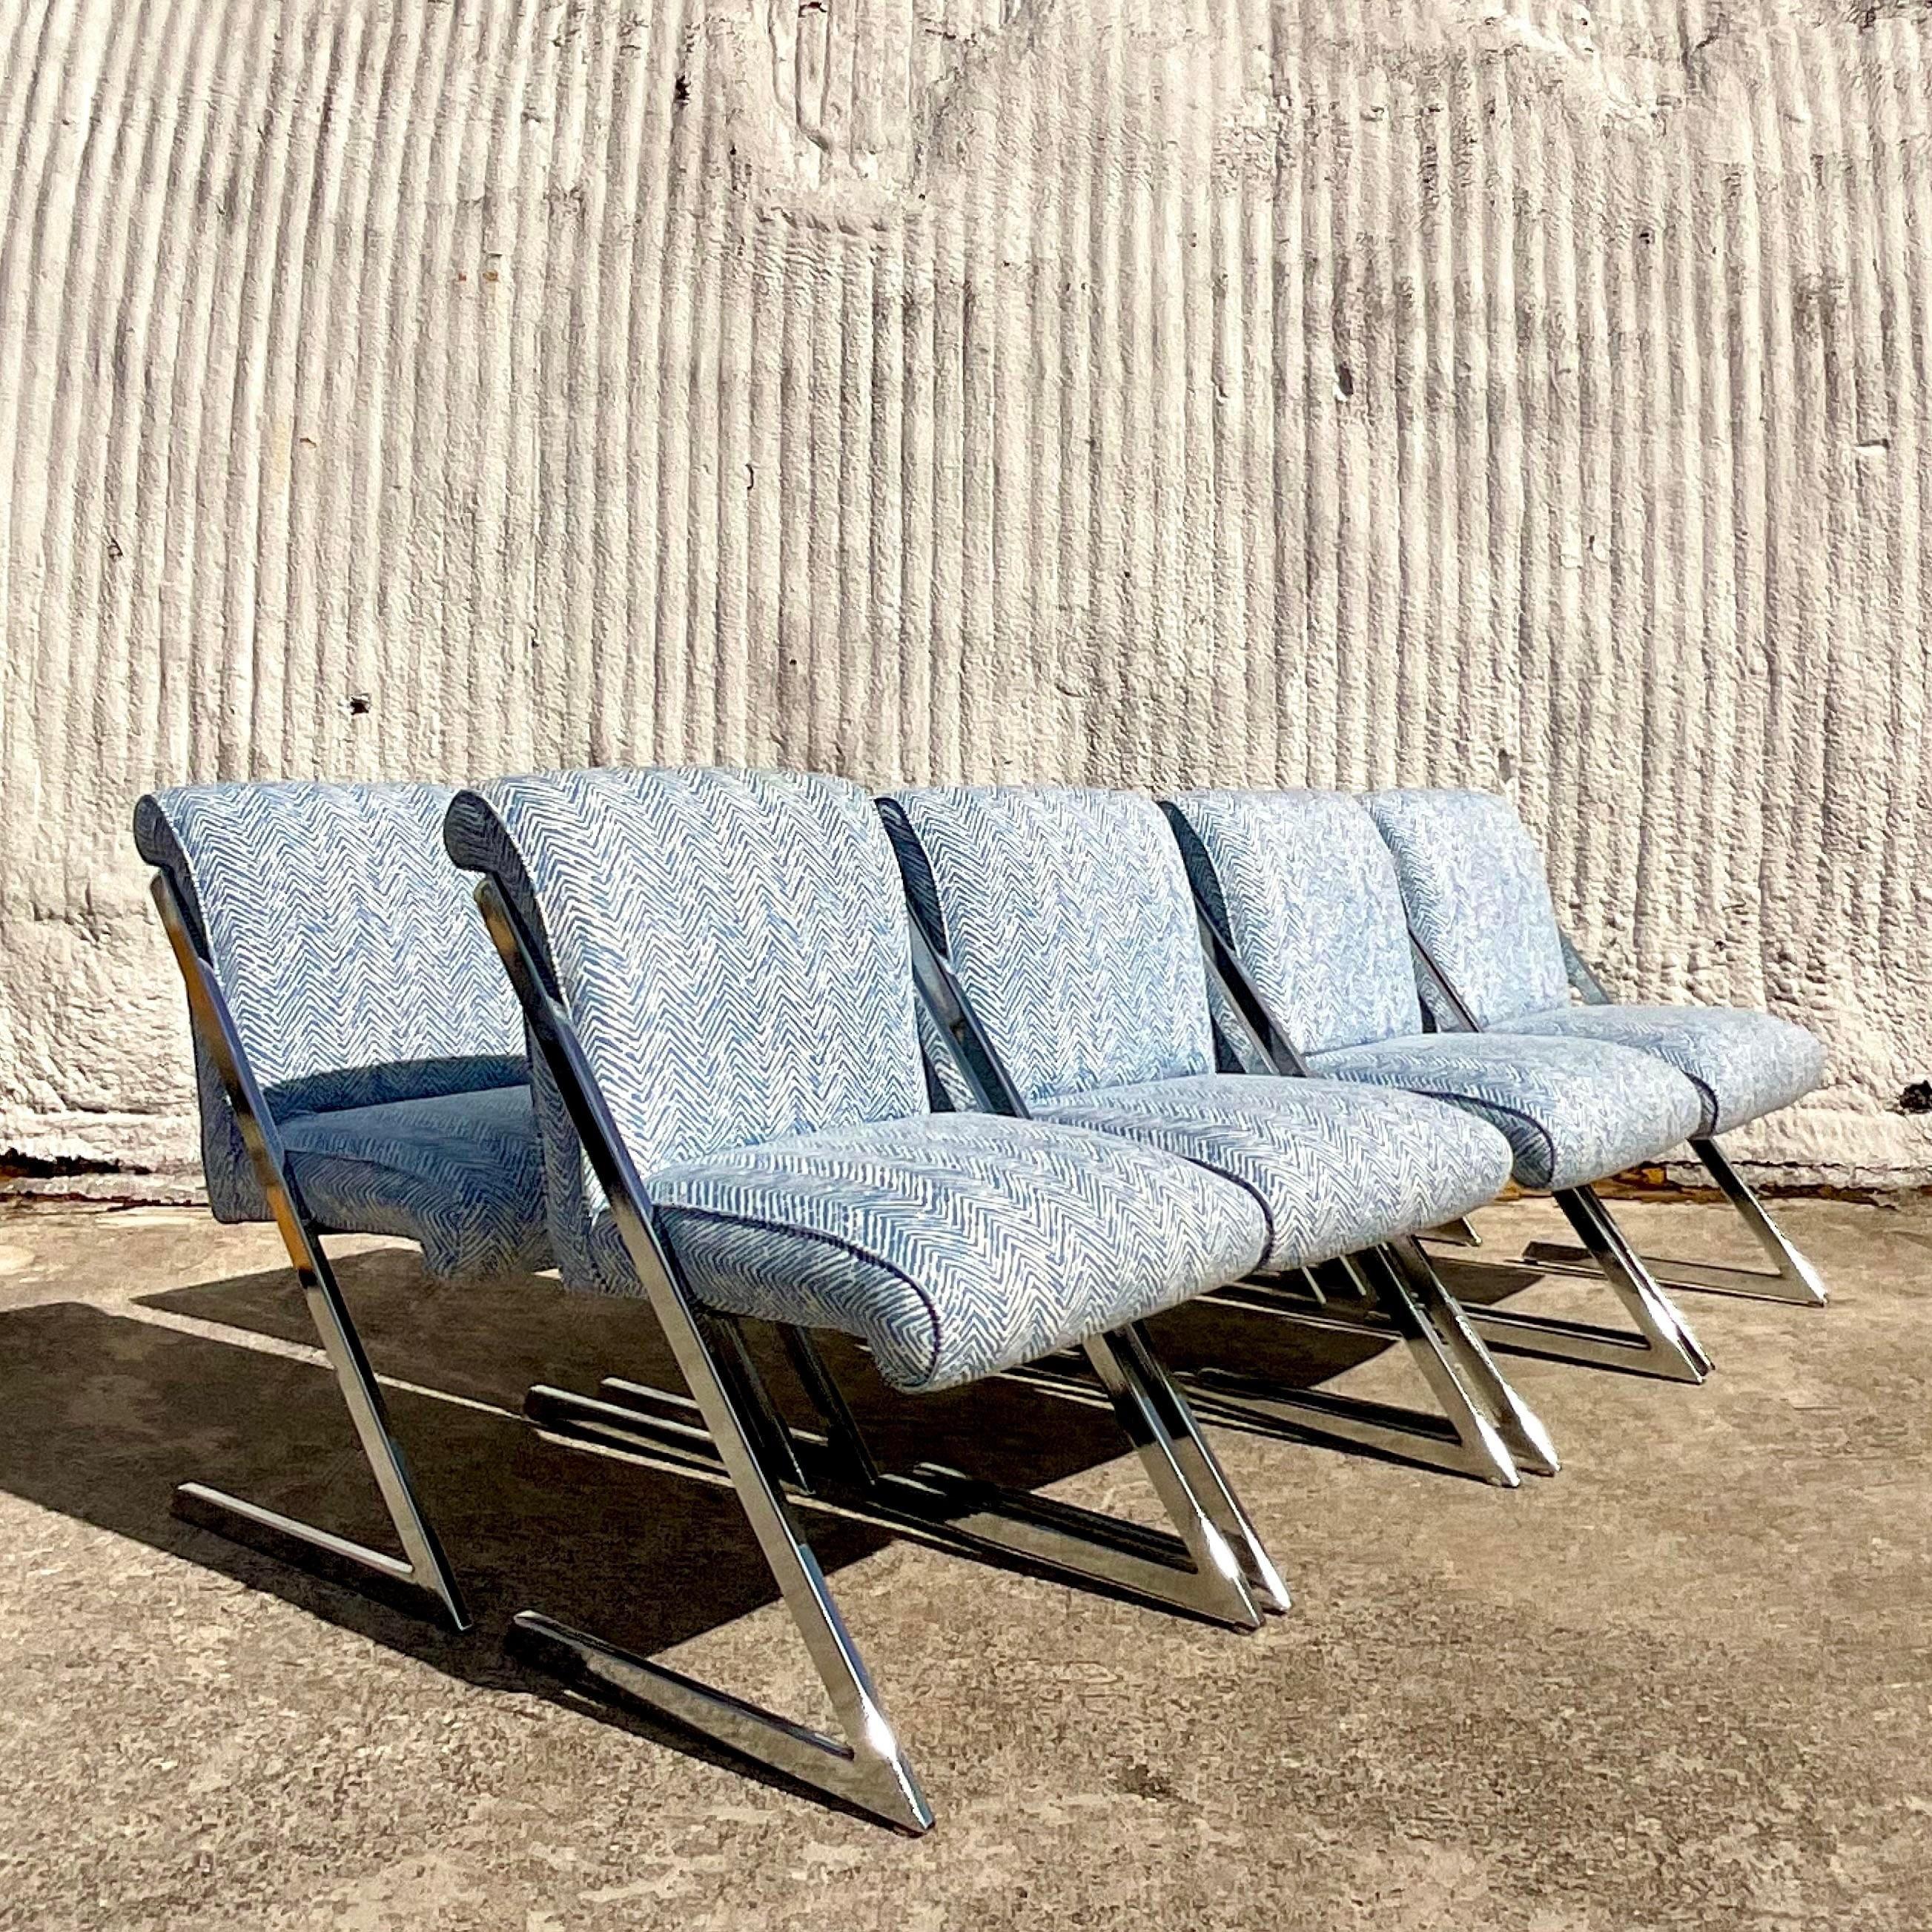 A spectacular set of vintage Boho pristine dining chairs. The iconic Z chair in polished chrome in the manner of Milo Baughman. Freshly reupholstered in Meg Braff Tweed collection fabric in Medium blue. Acquired from a Palm Beach estate.